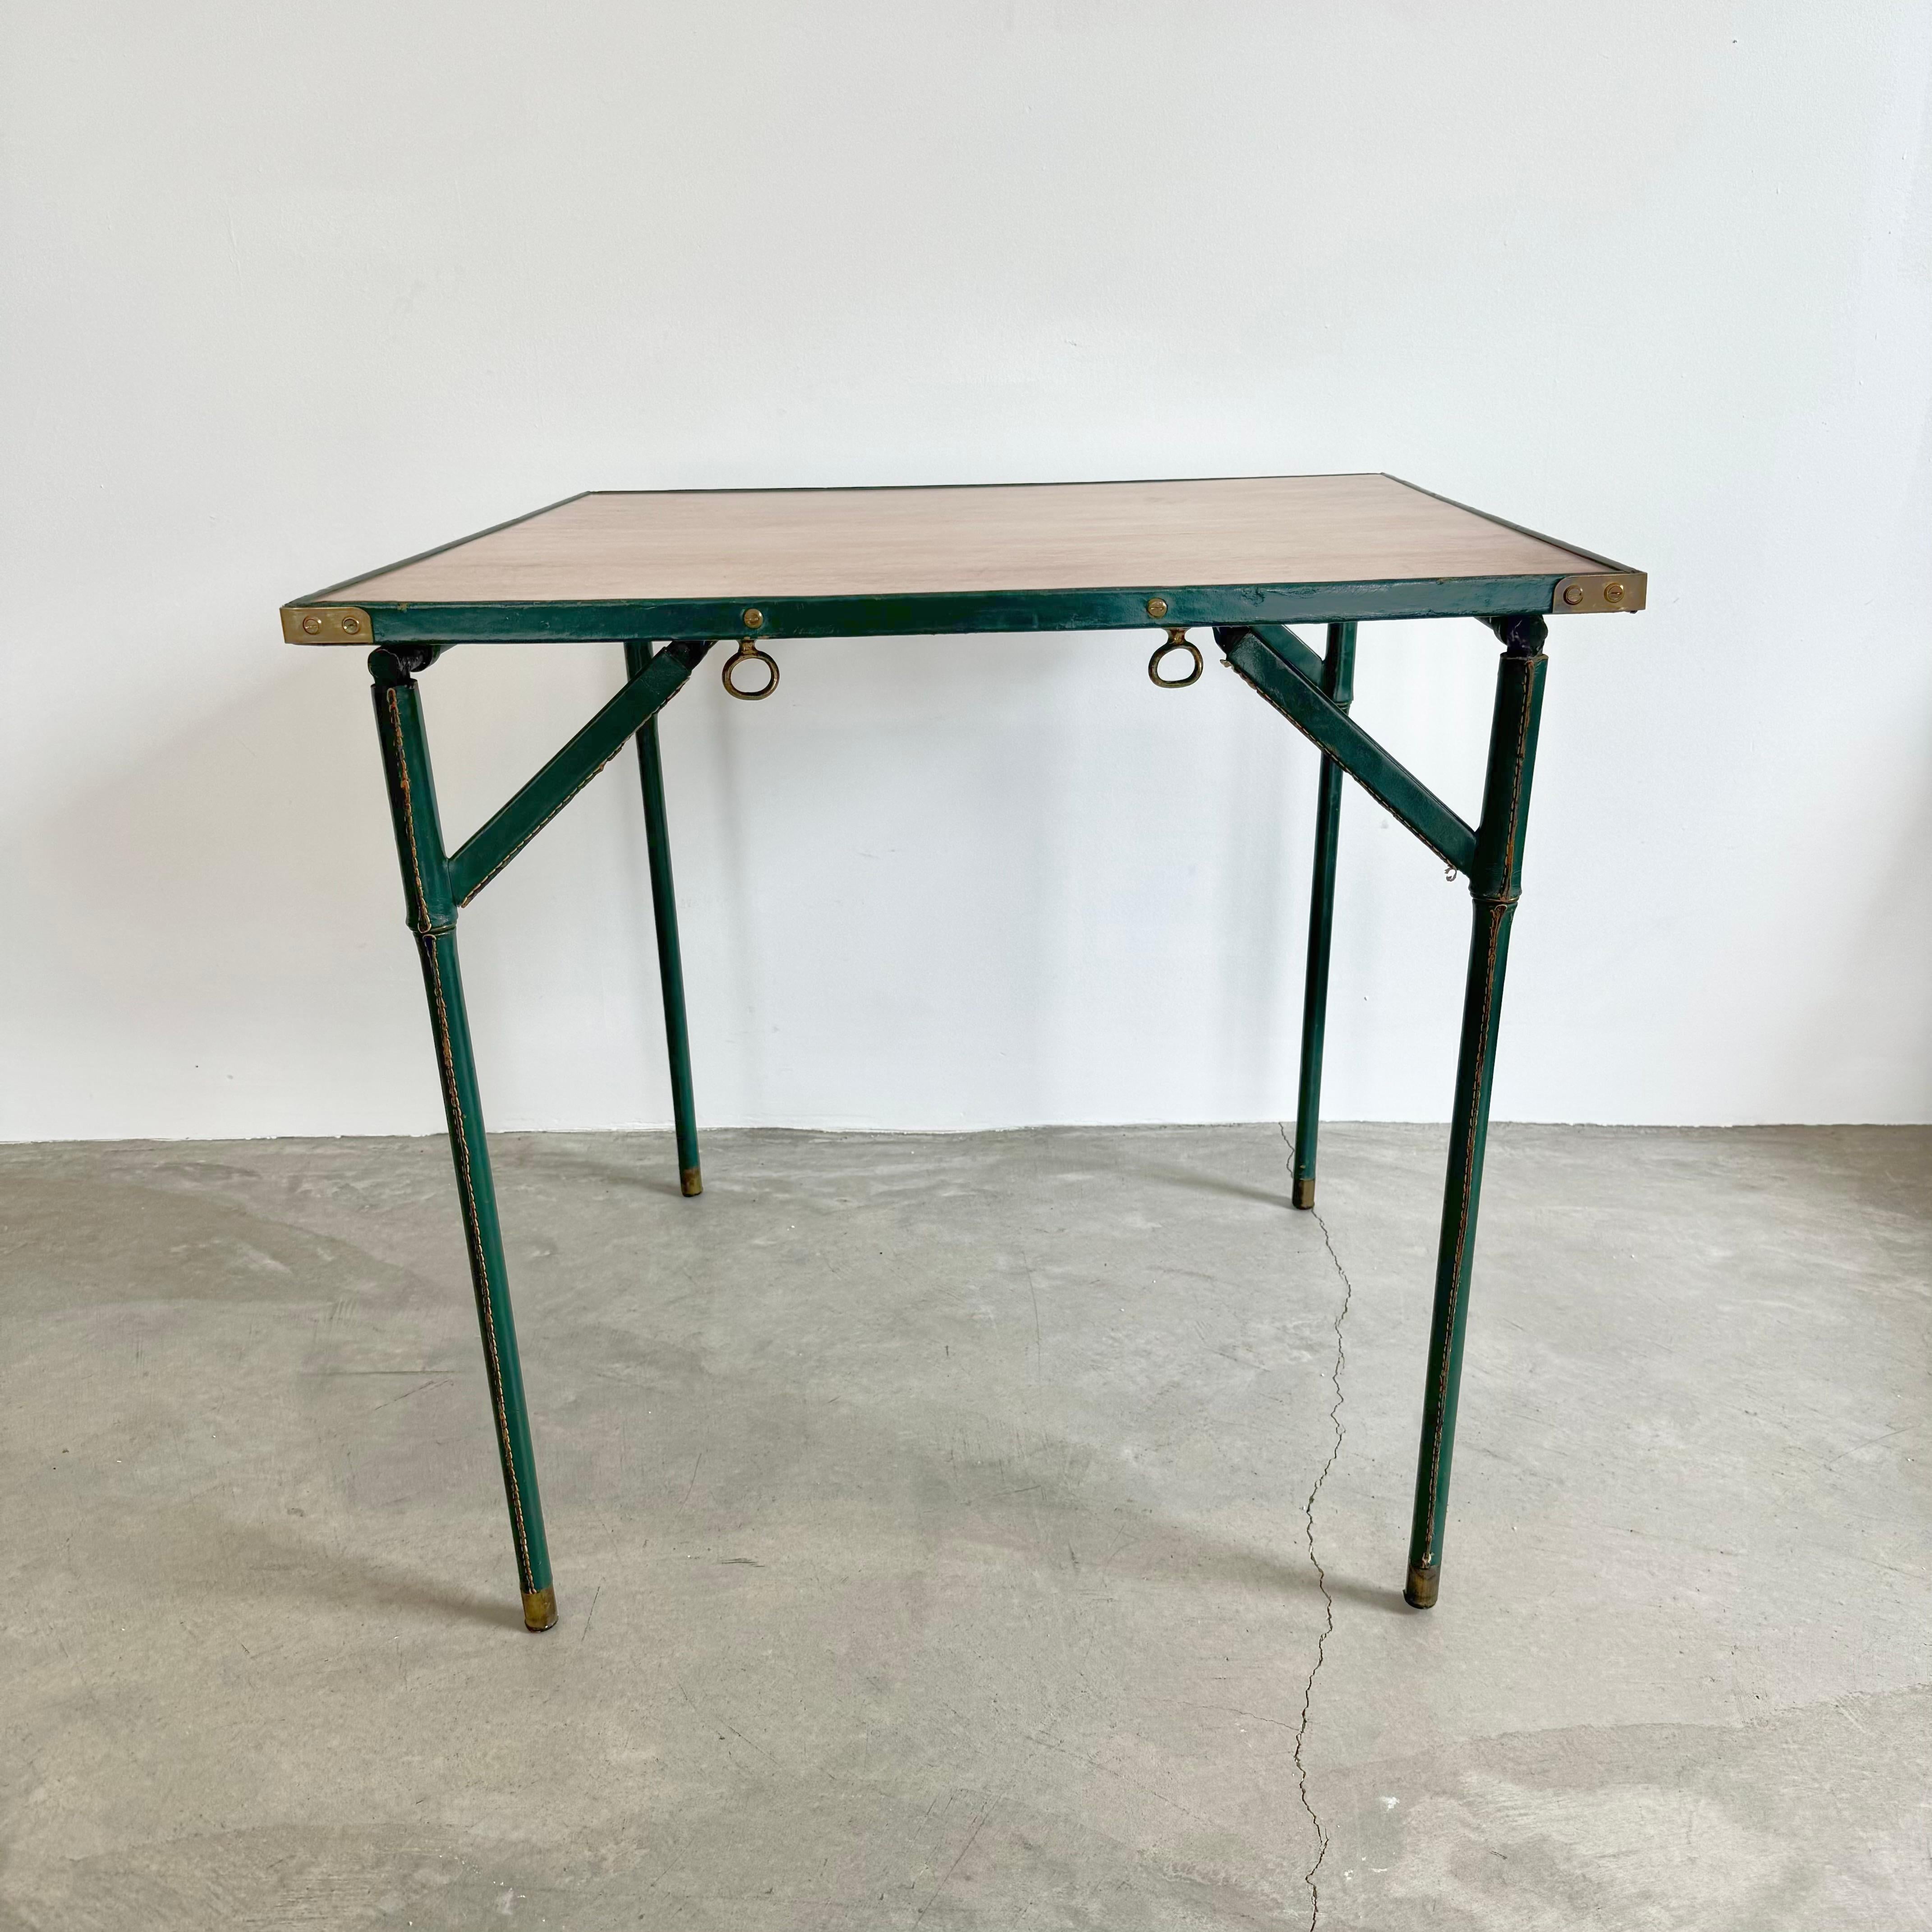 Jacques Adnet Green Leather and Wood Game Table, 1950s France For Sale 5